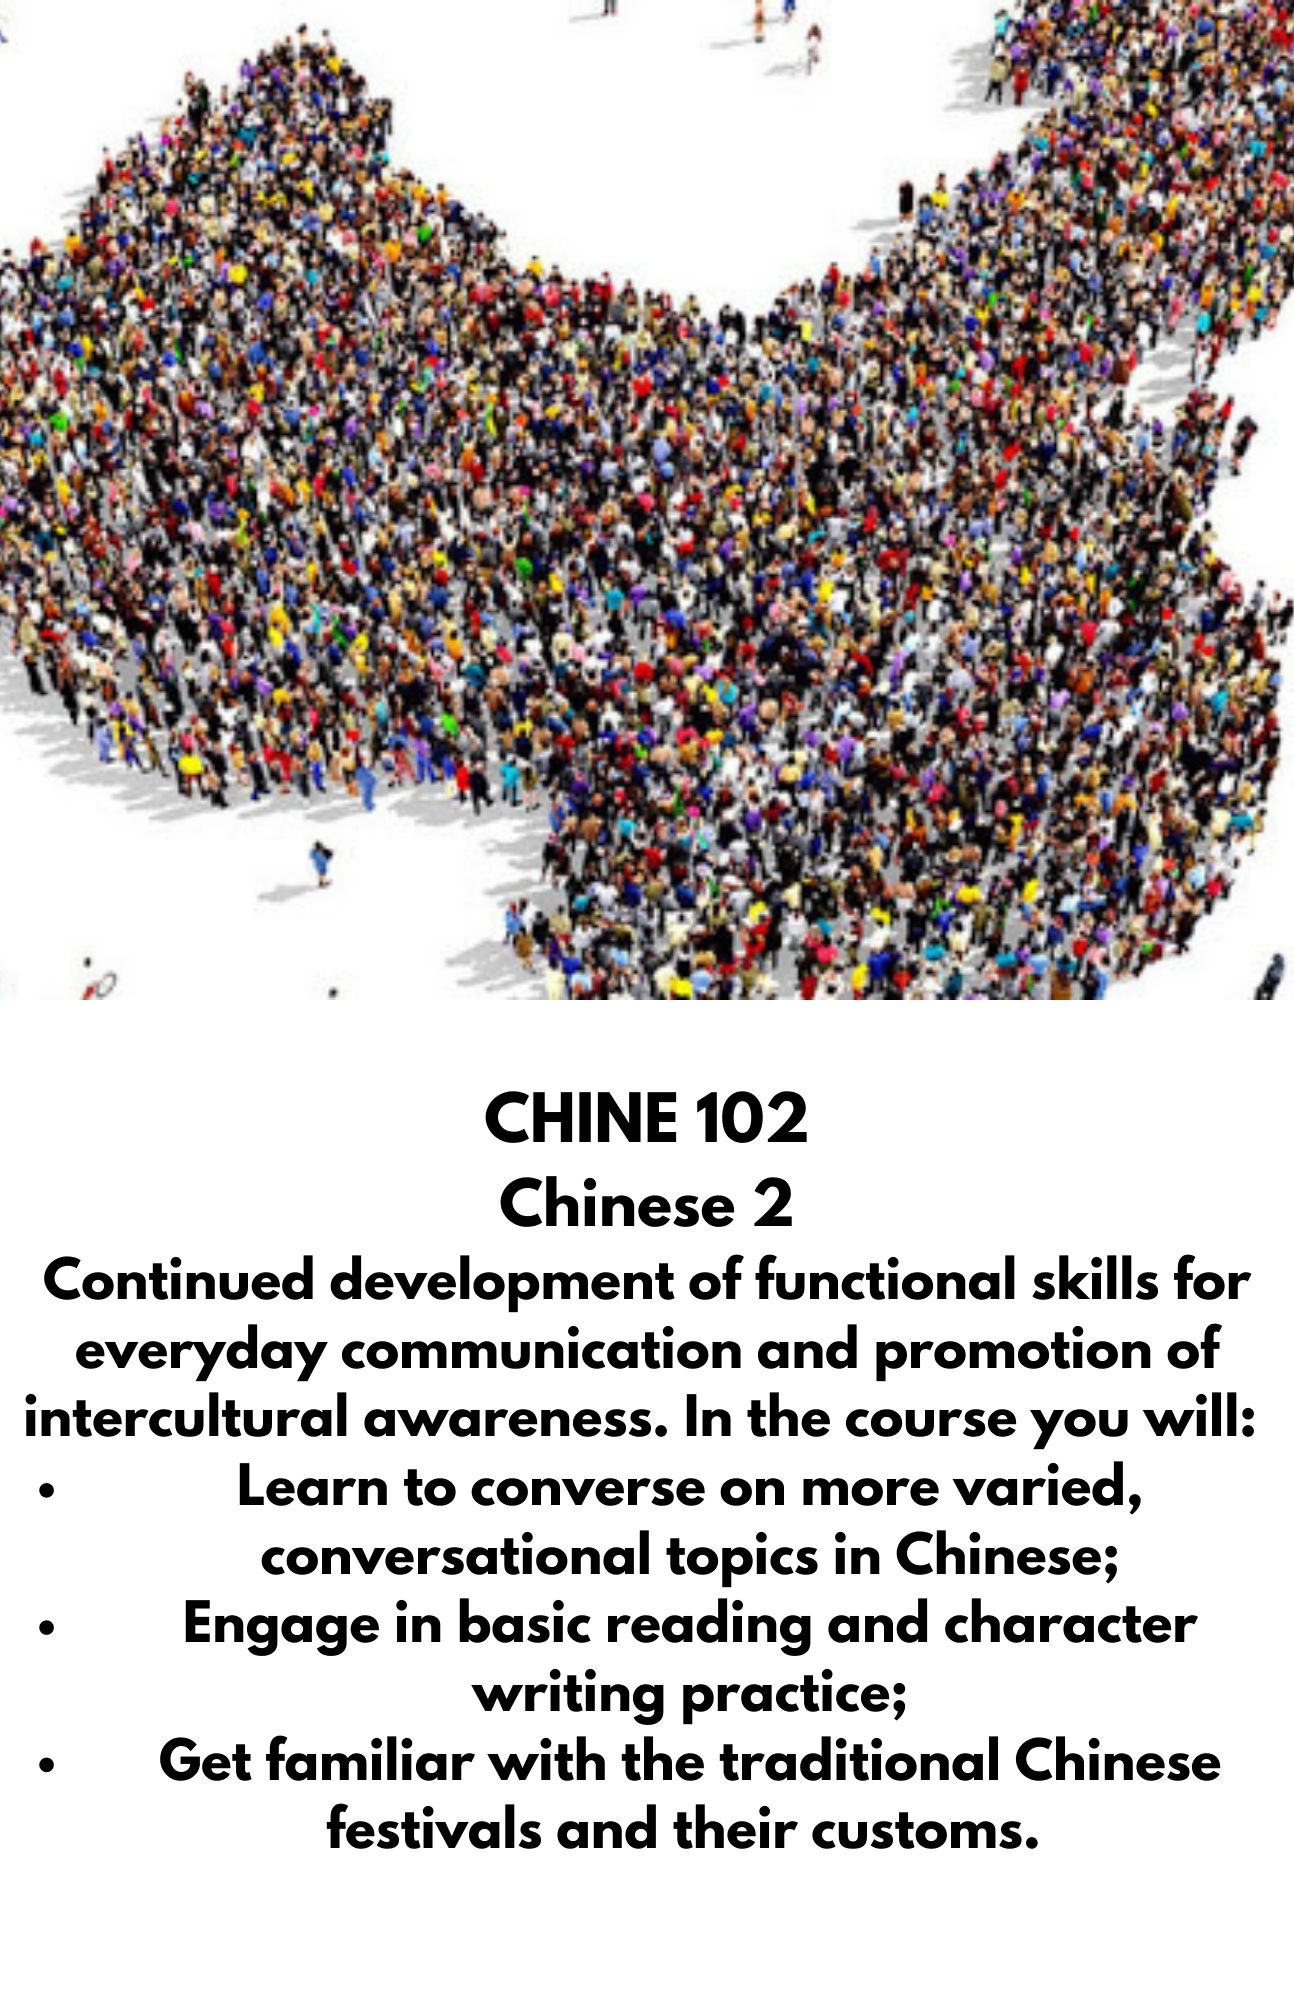 CHINE 102  Chinese 2  Continued development of functional skills for everyday communication and promotion of intercultural awareness. In the course you will:  Learn to converse on more varied, conversational topics in Chinese; Engage in basic reading and character writing practice; Get familiar with the traditional Chinese festivals and their customs.